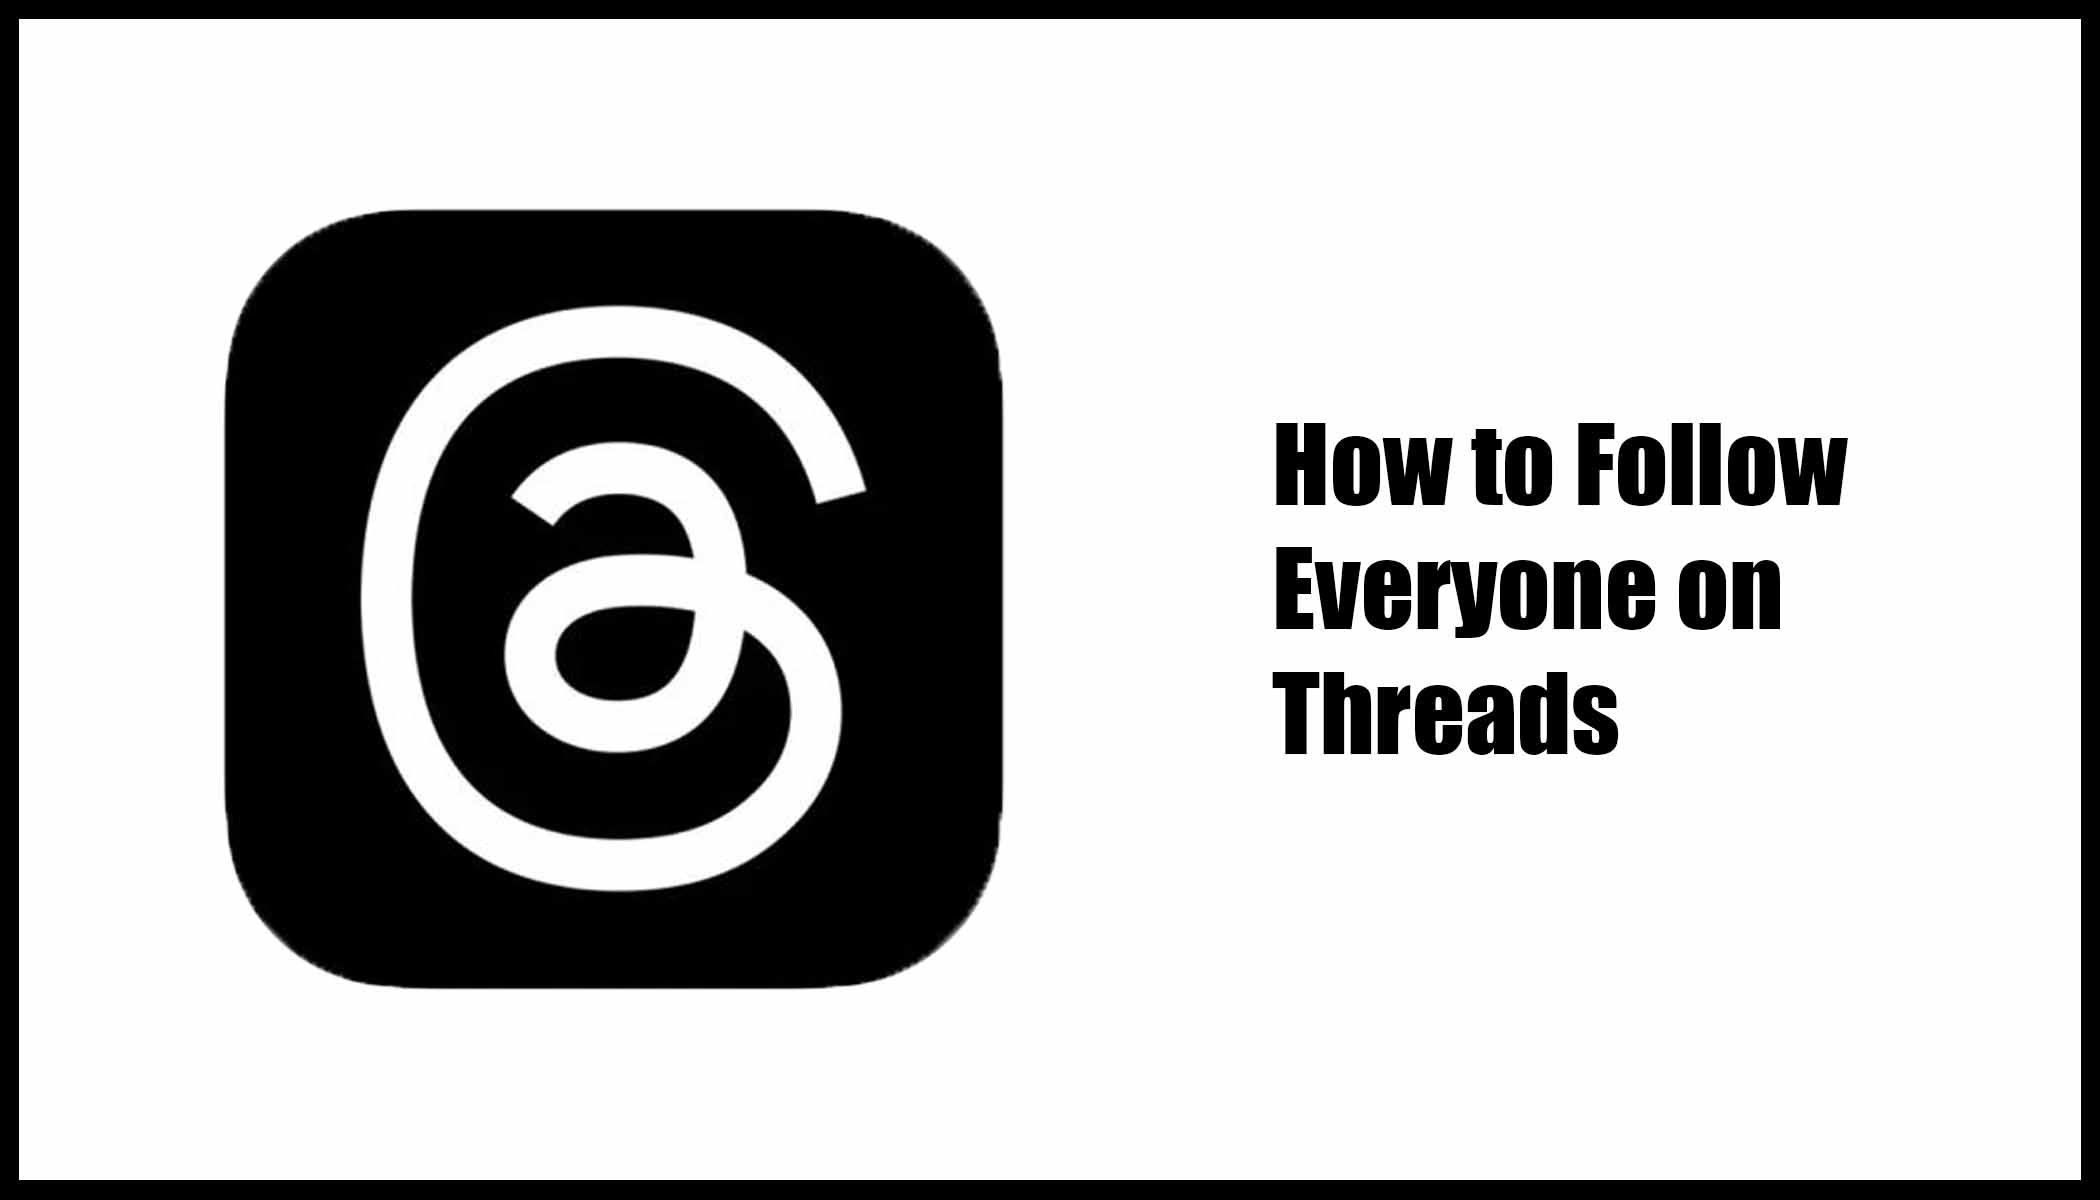 How to Follow Everyone on Threads